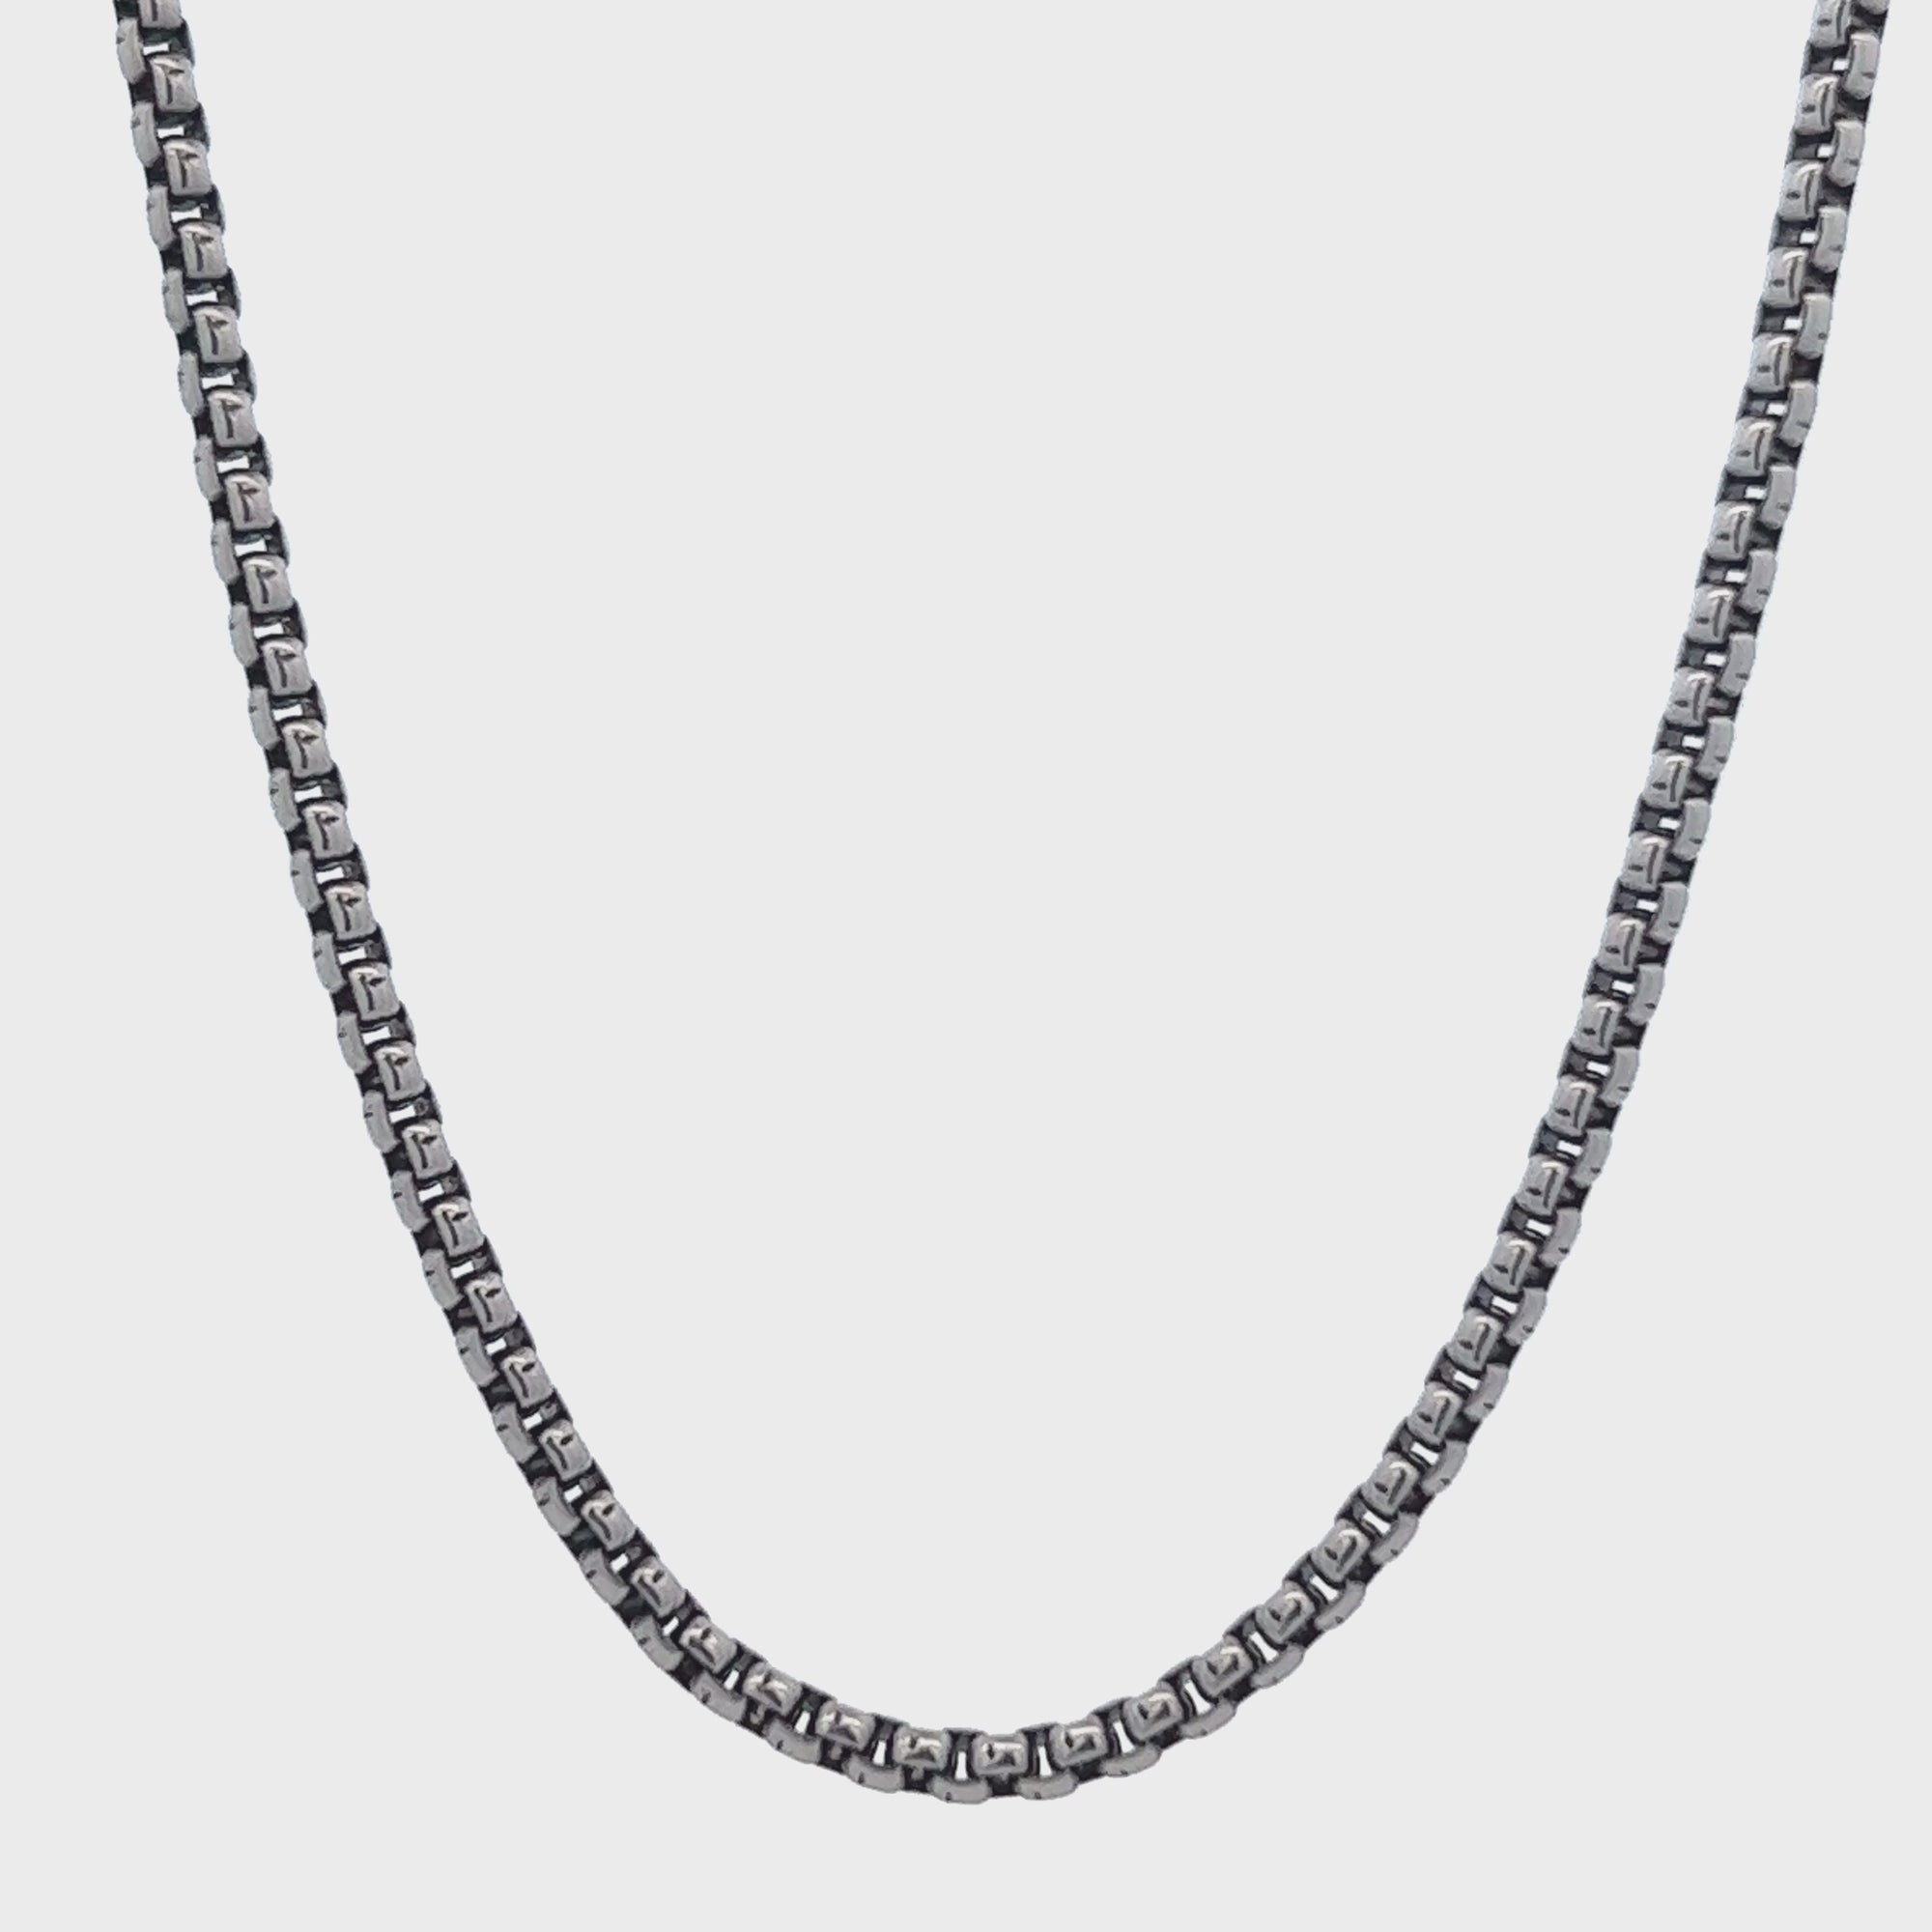 Antiqued Silver Tone Stainless Steel 3mm Oxidized Bold Box Chain